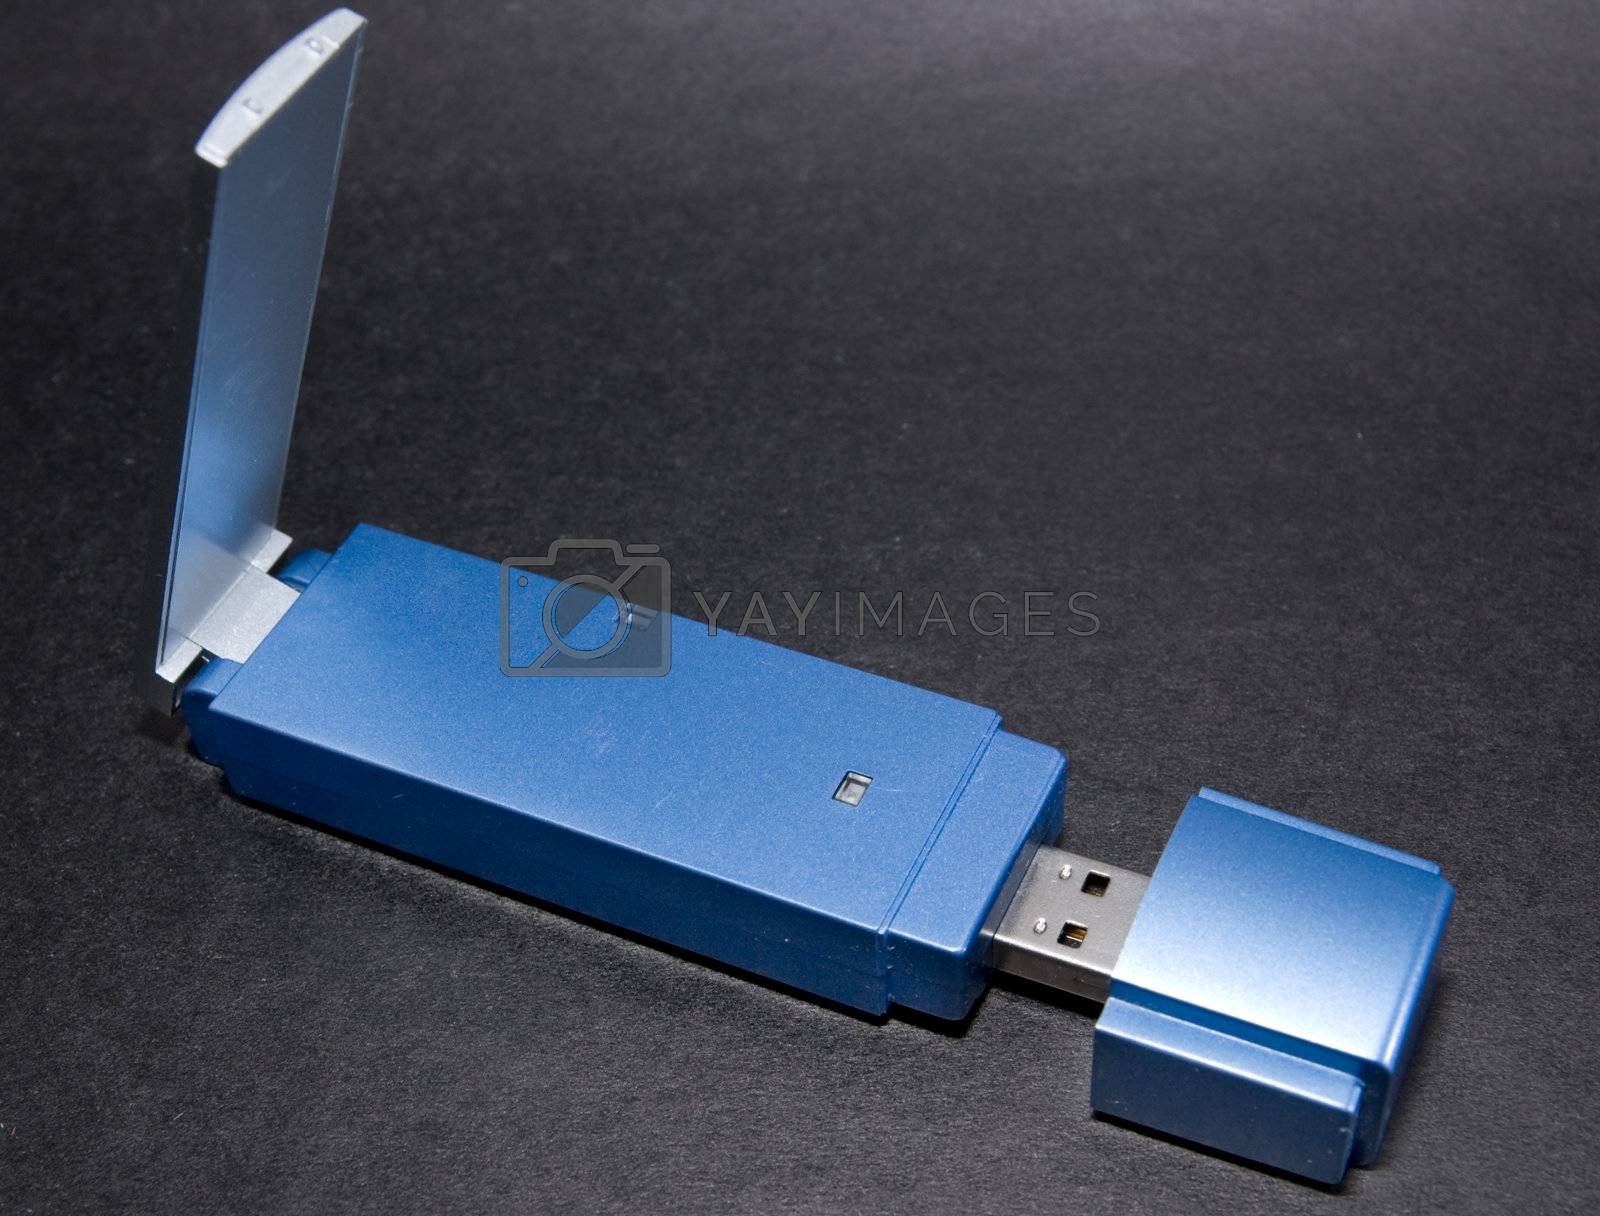 Royalty free image of Wireless Bluetooth Adapter by andyphoto